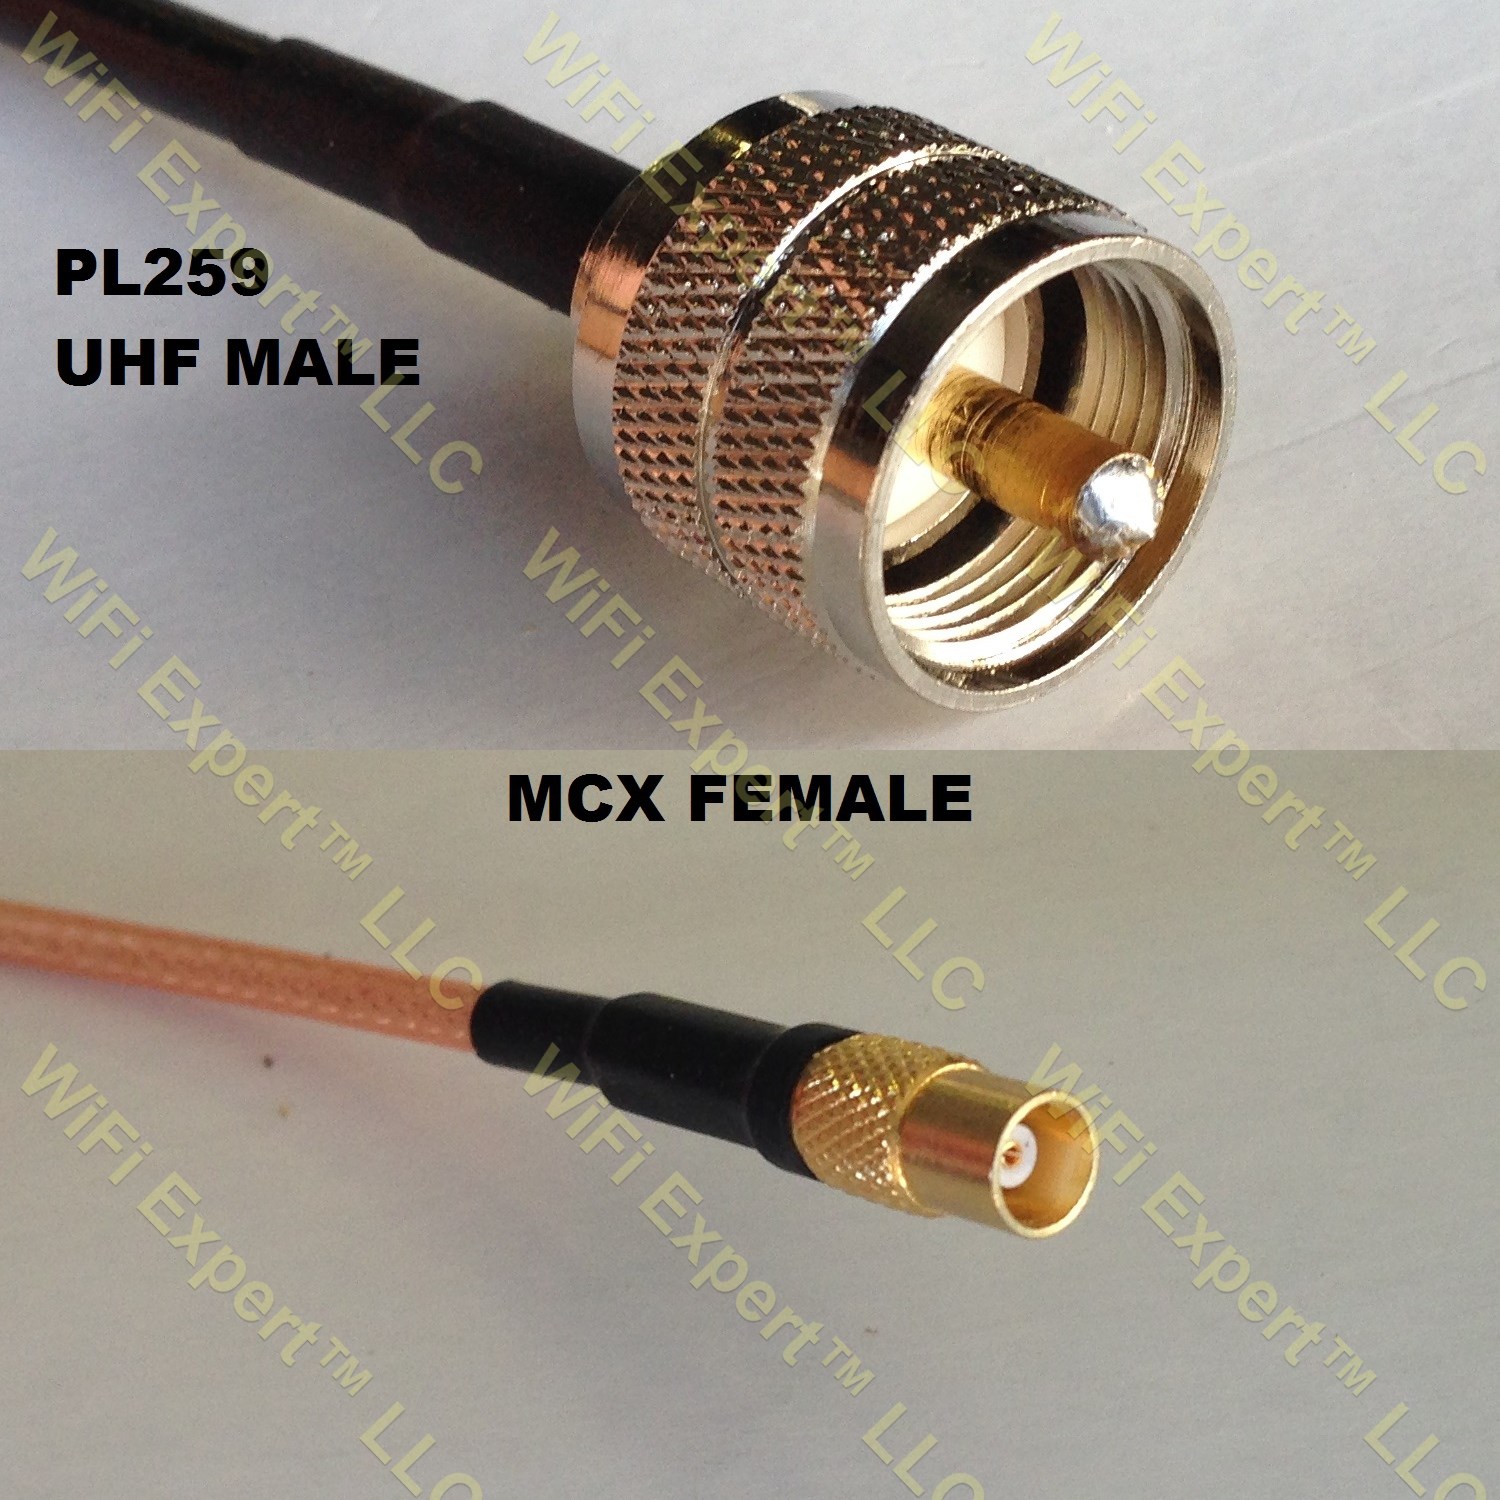 3 feet RG316 MCX Male to SO239 UHF Female RF Pigtail Coaxial Cable 